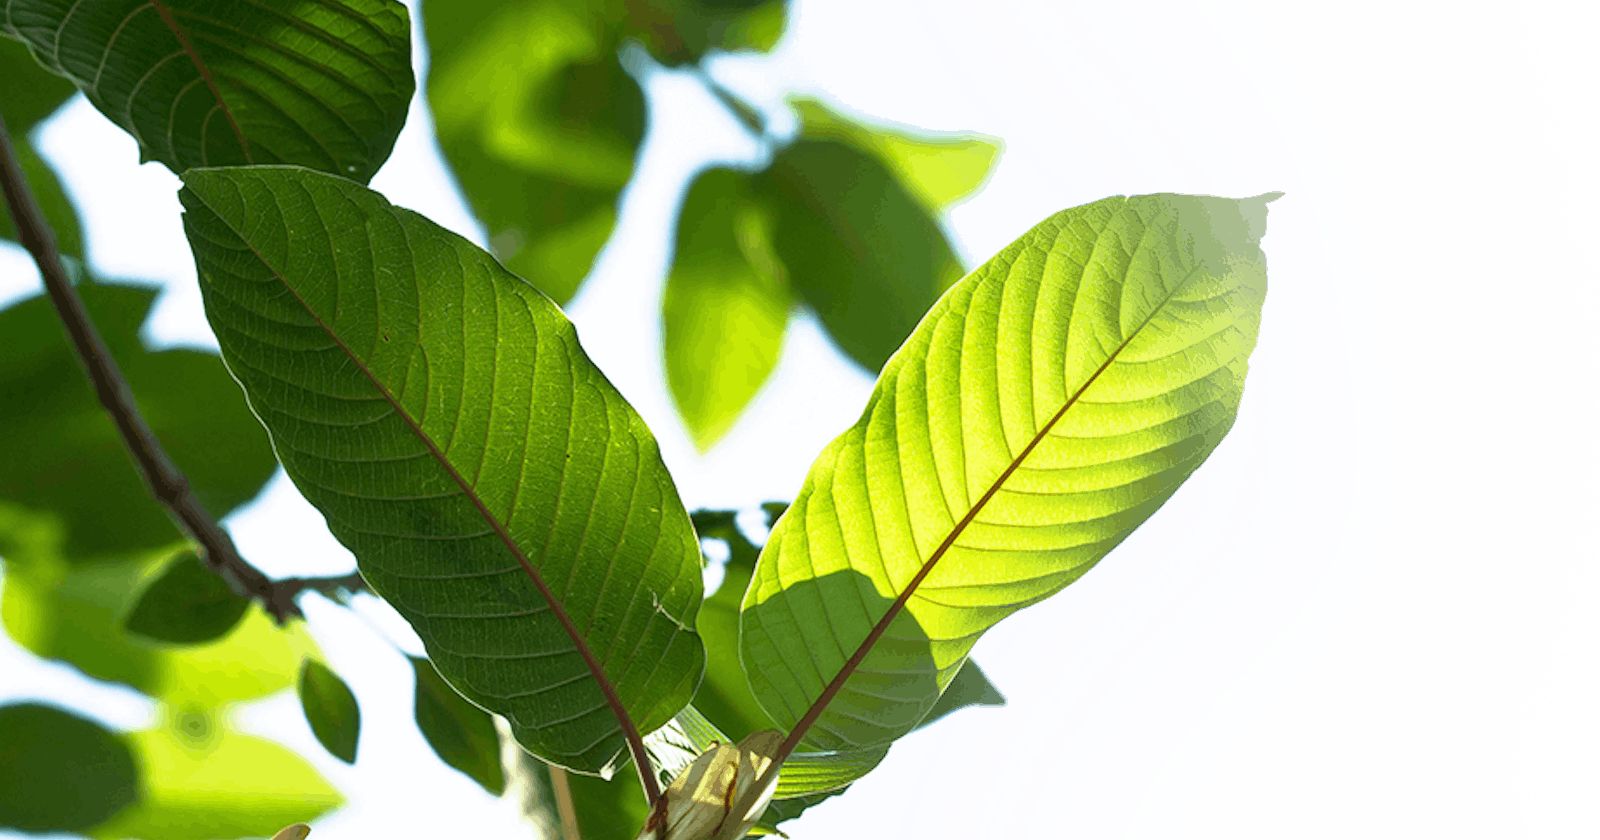 How To Know The Correct Dosage For Kratom?